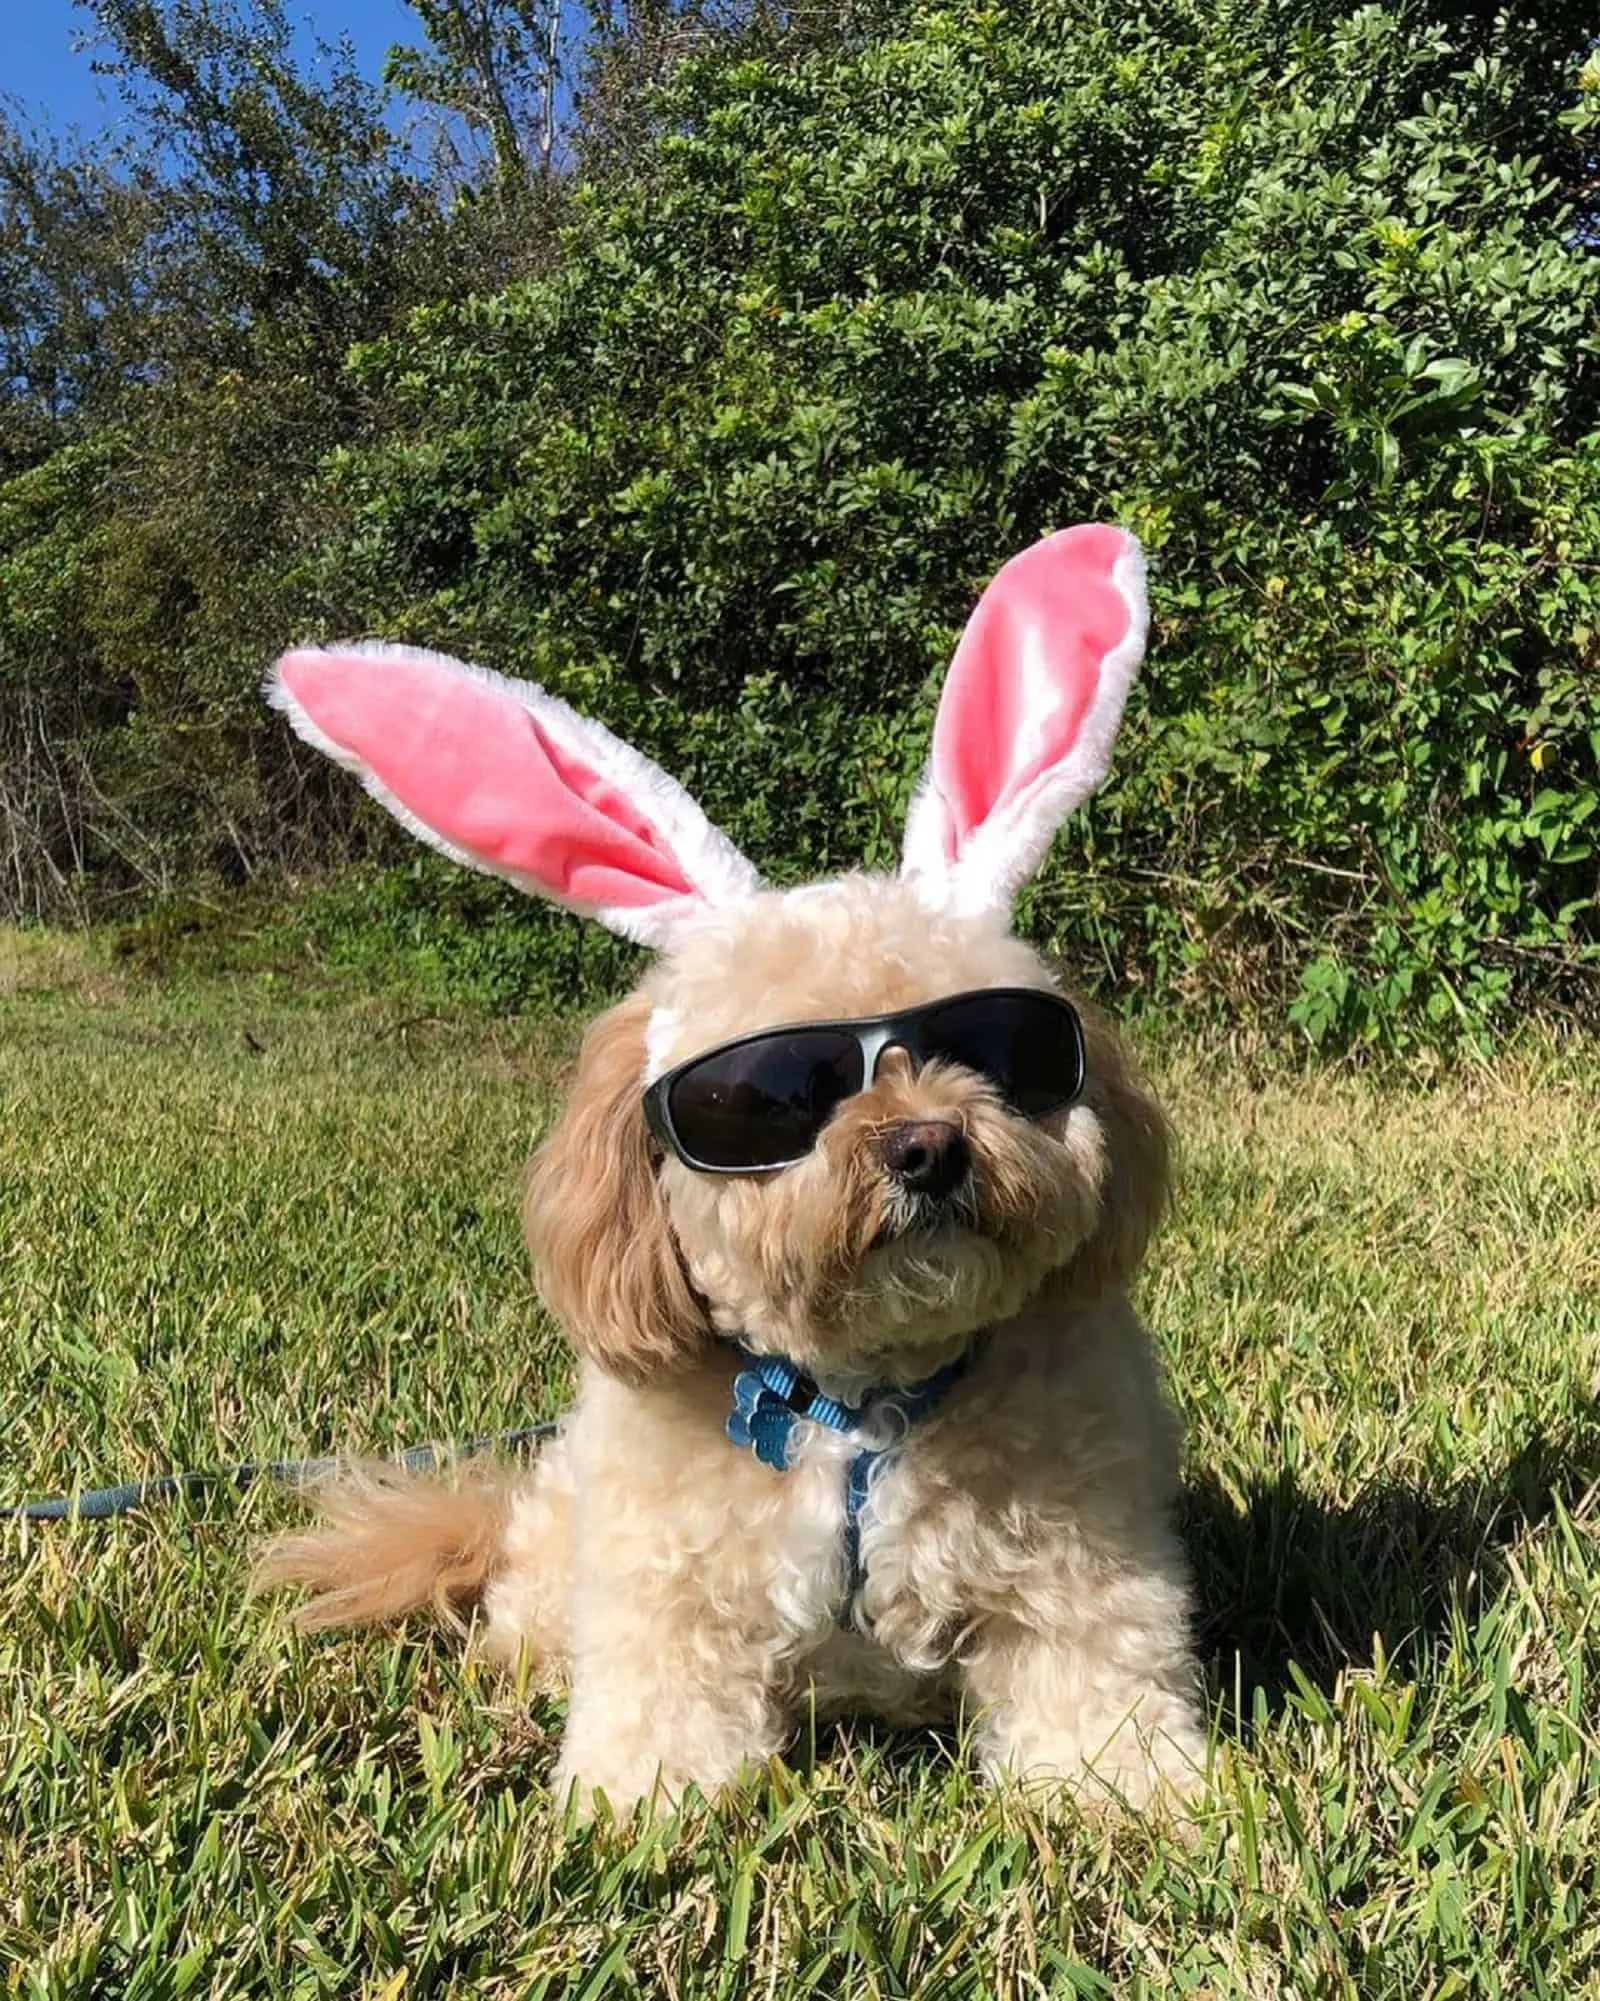 dog wearing sunglasses and bunny ears lying in the grass